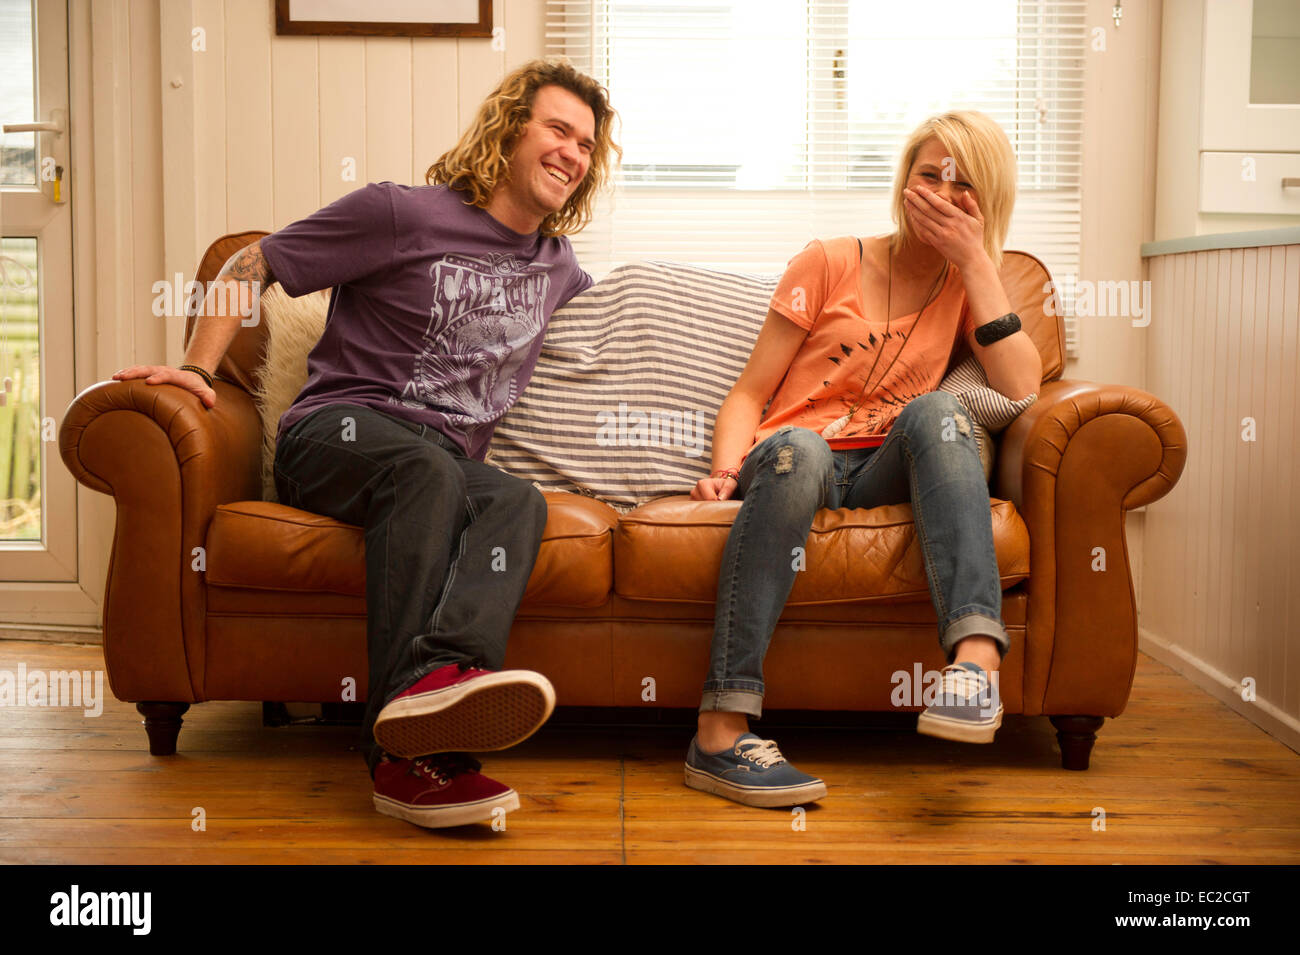 A young couple relaxing on a leather sofa Stock Photo